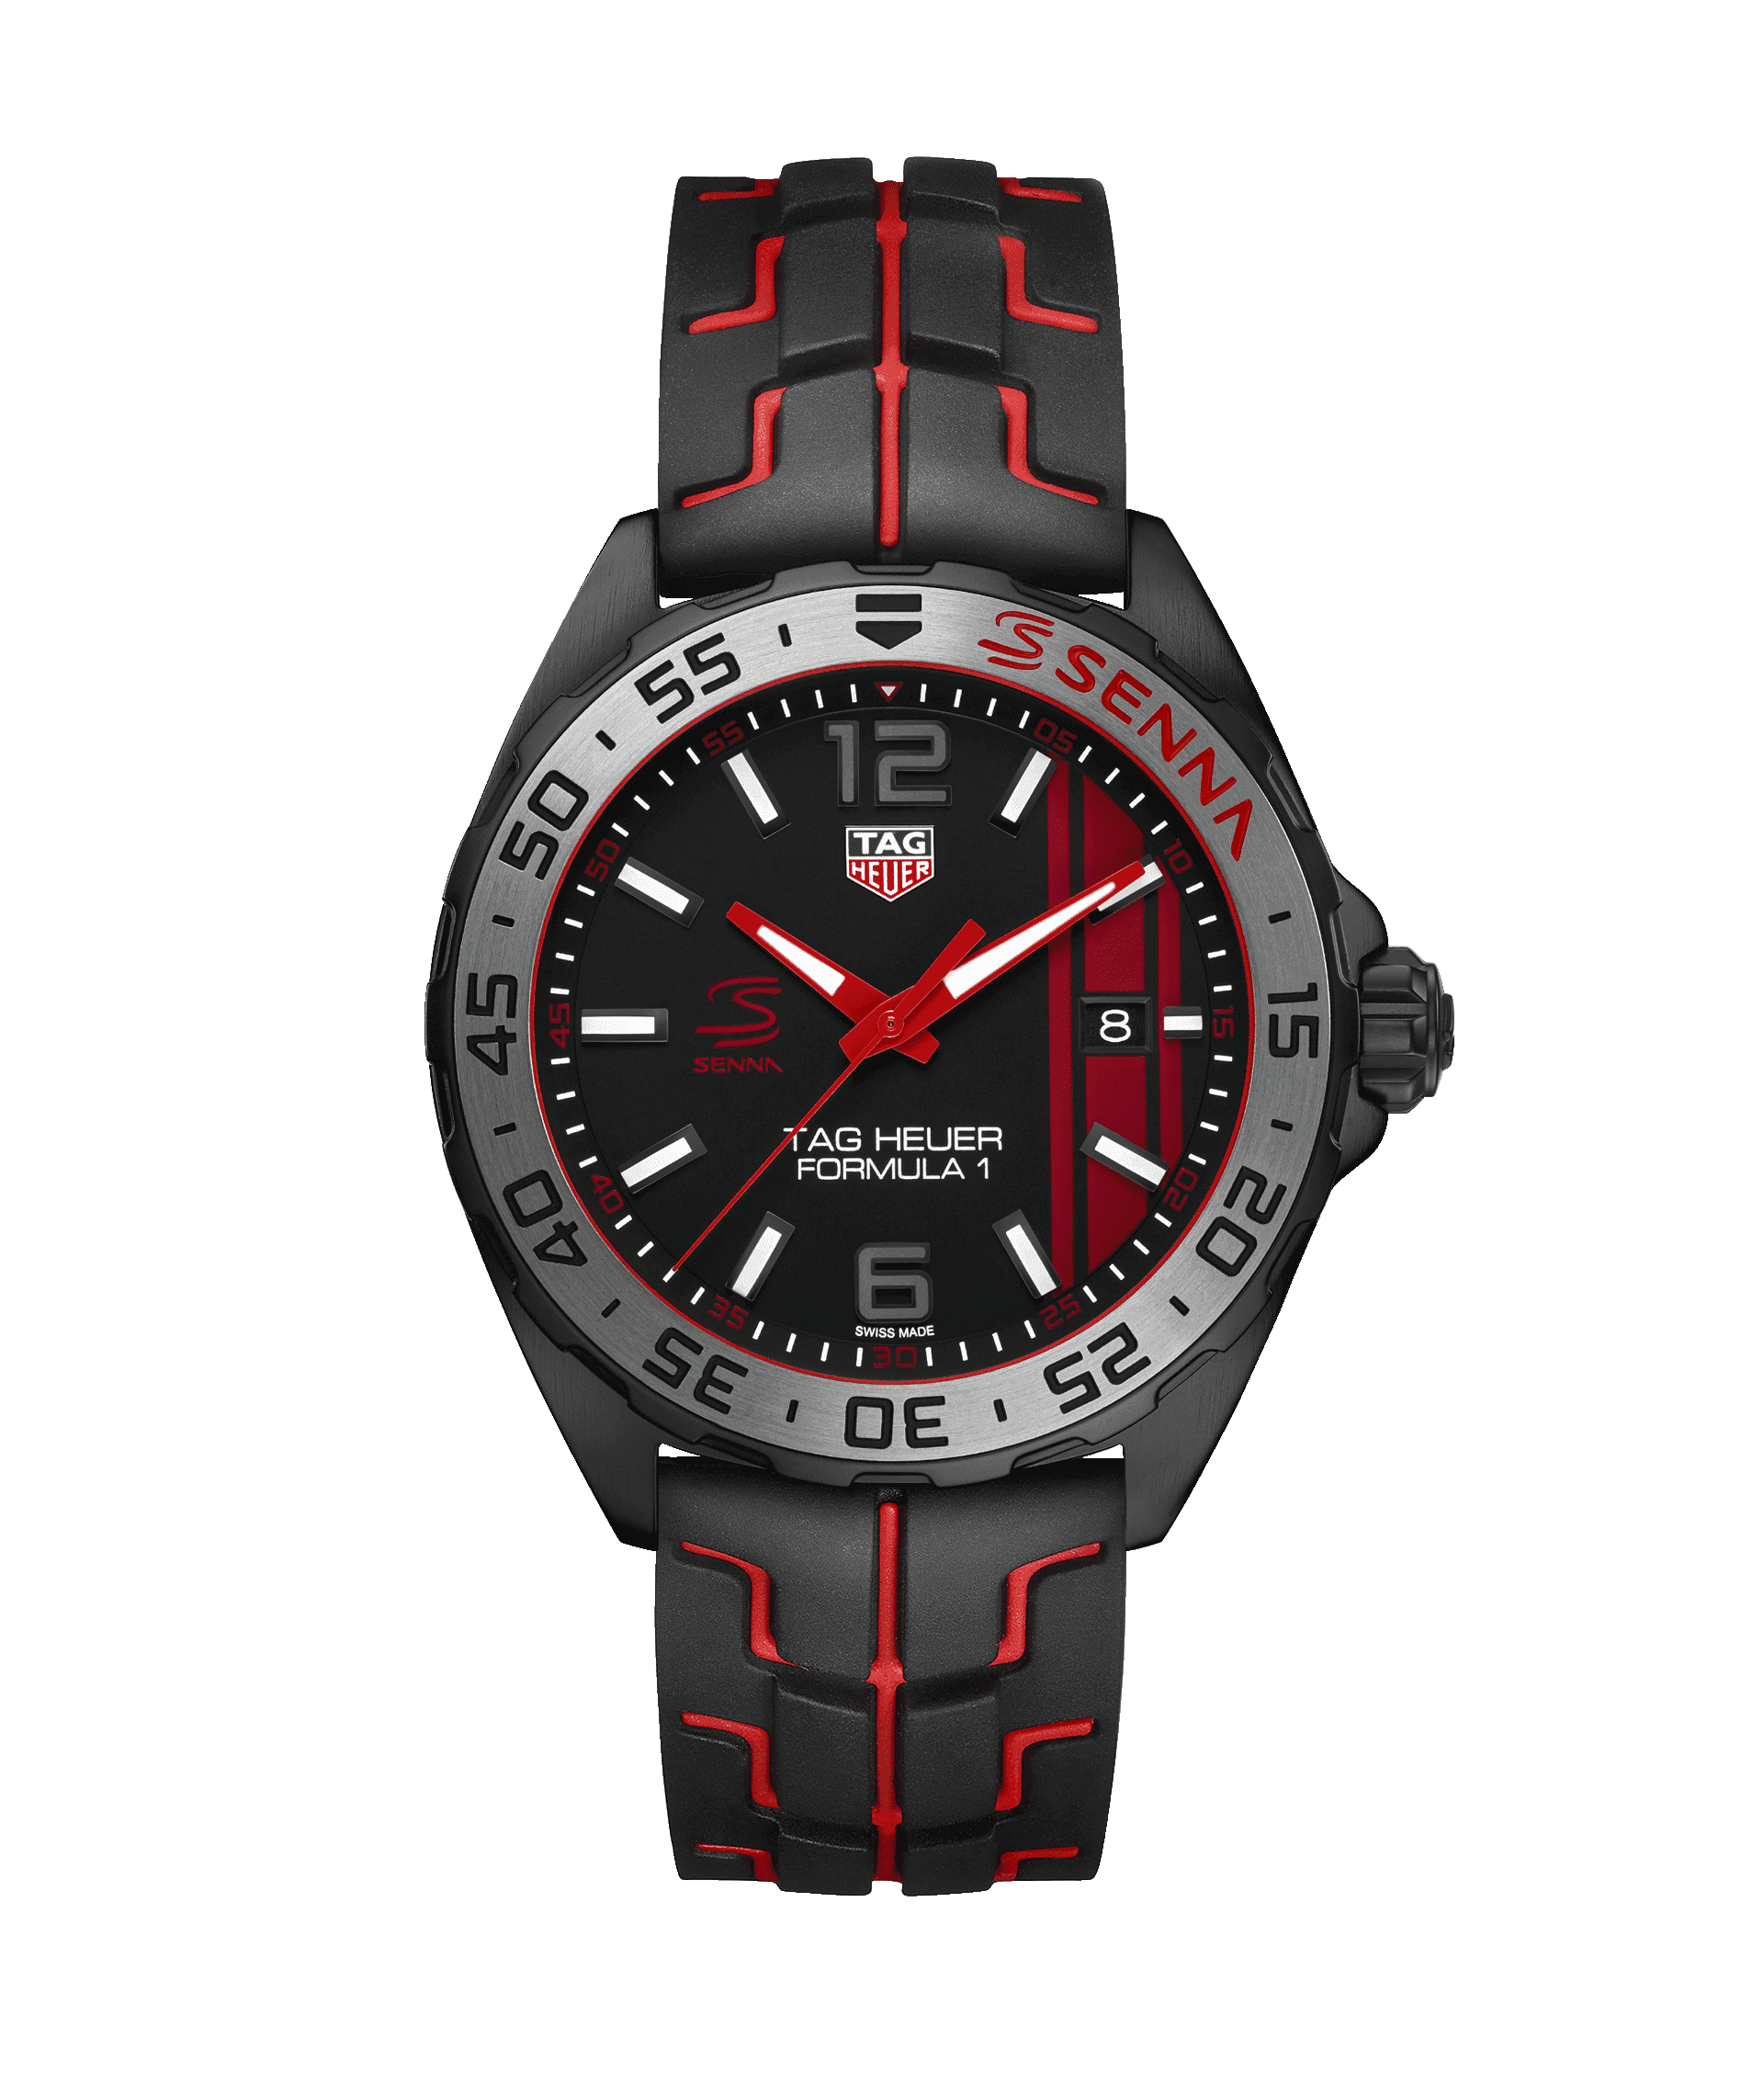 Why the TAG Heuer Formula 1 is one of the most popular watches